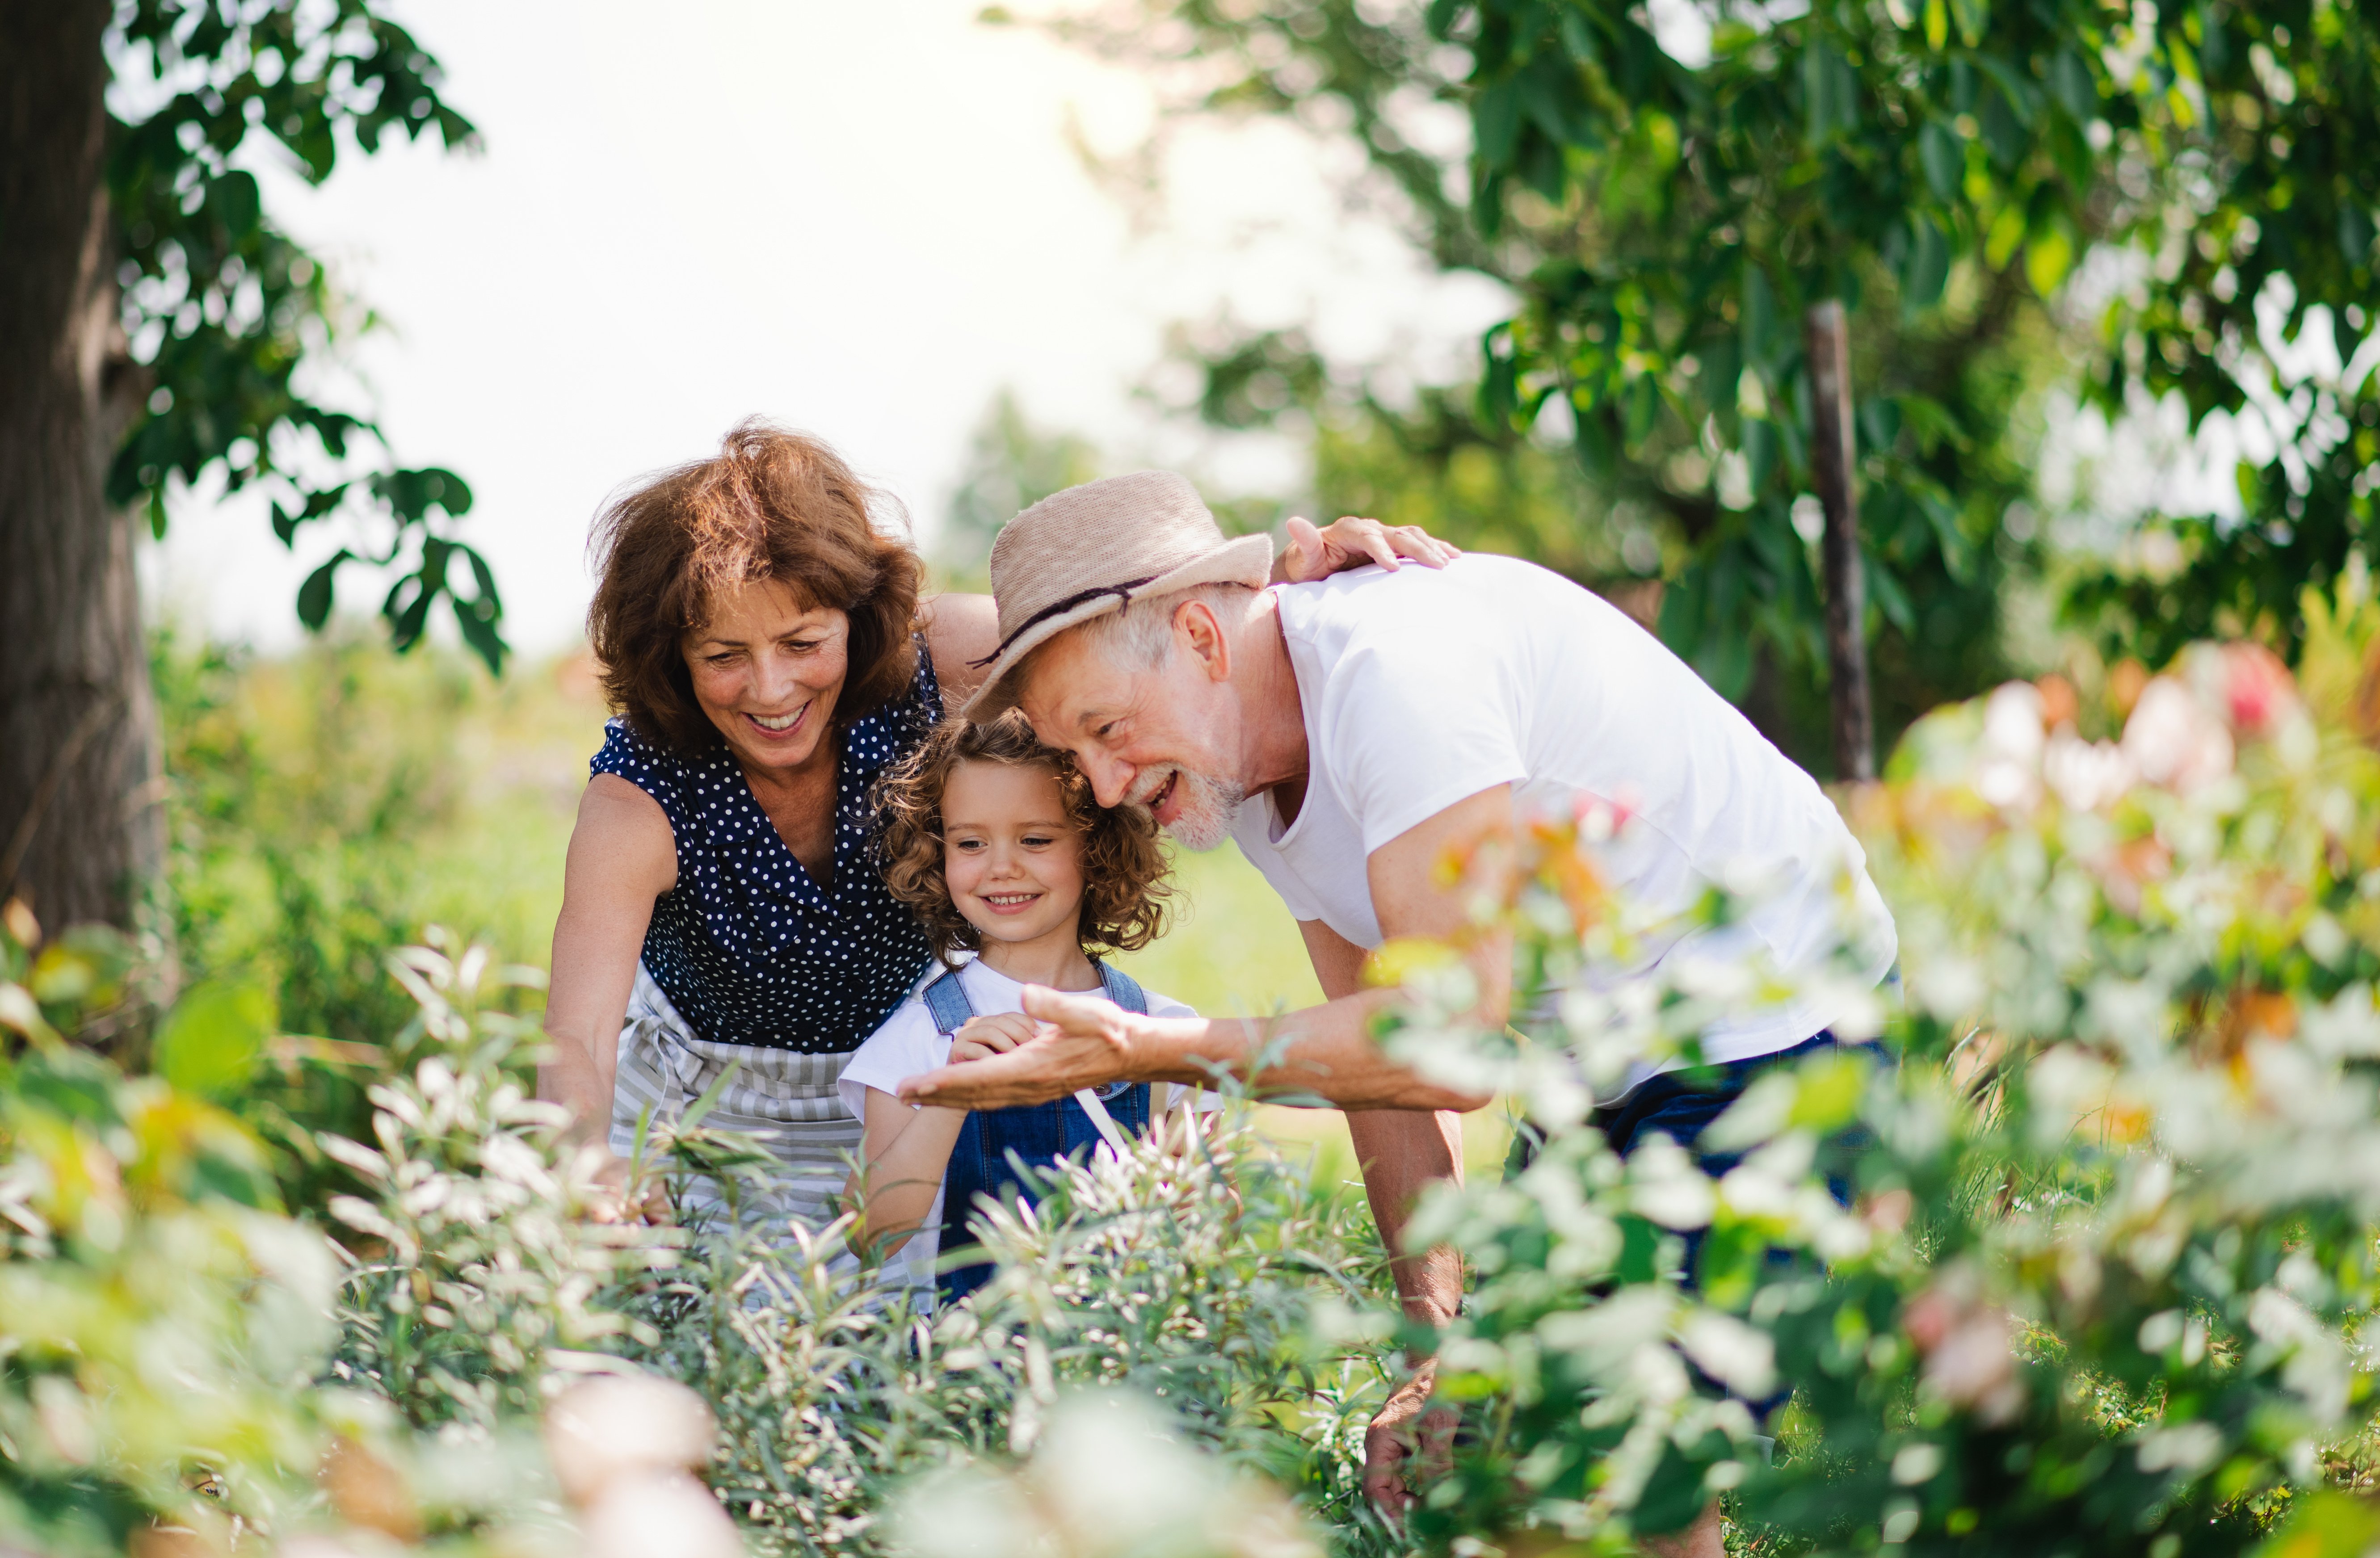 What Are the Health Benefits of Gardening for Seniors?